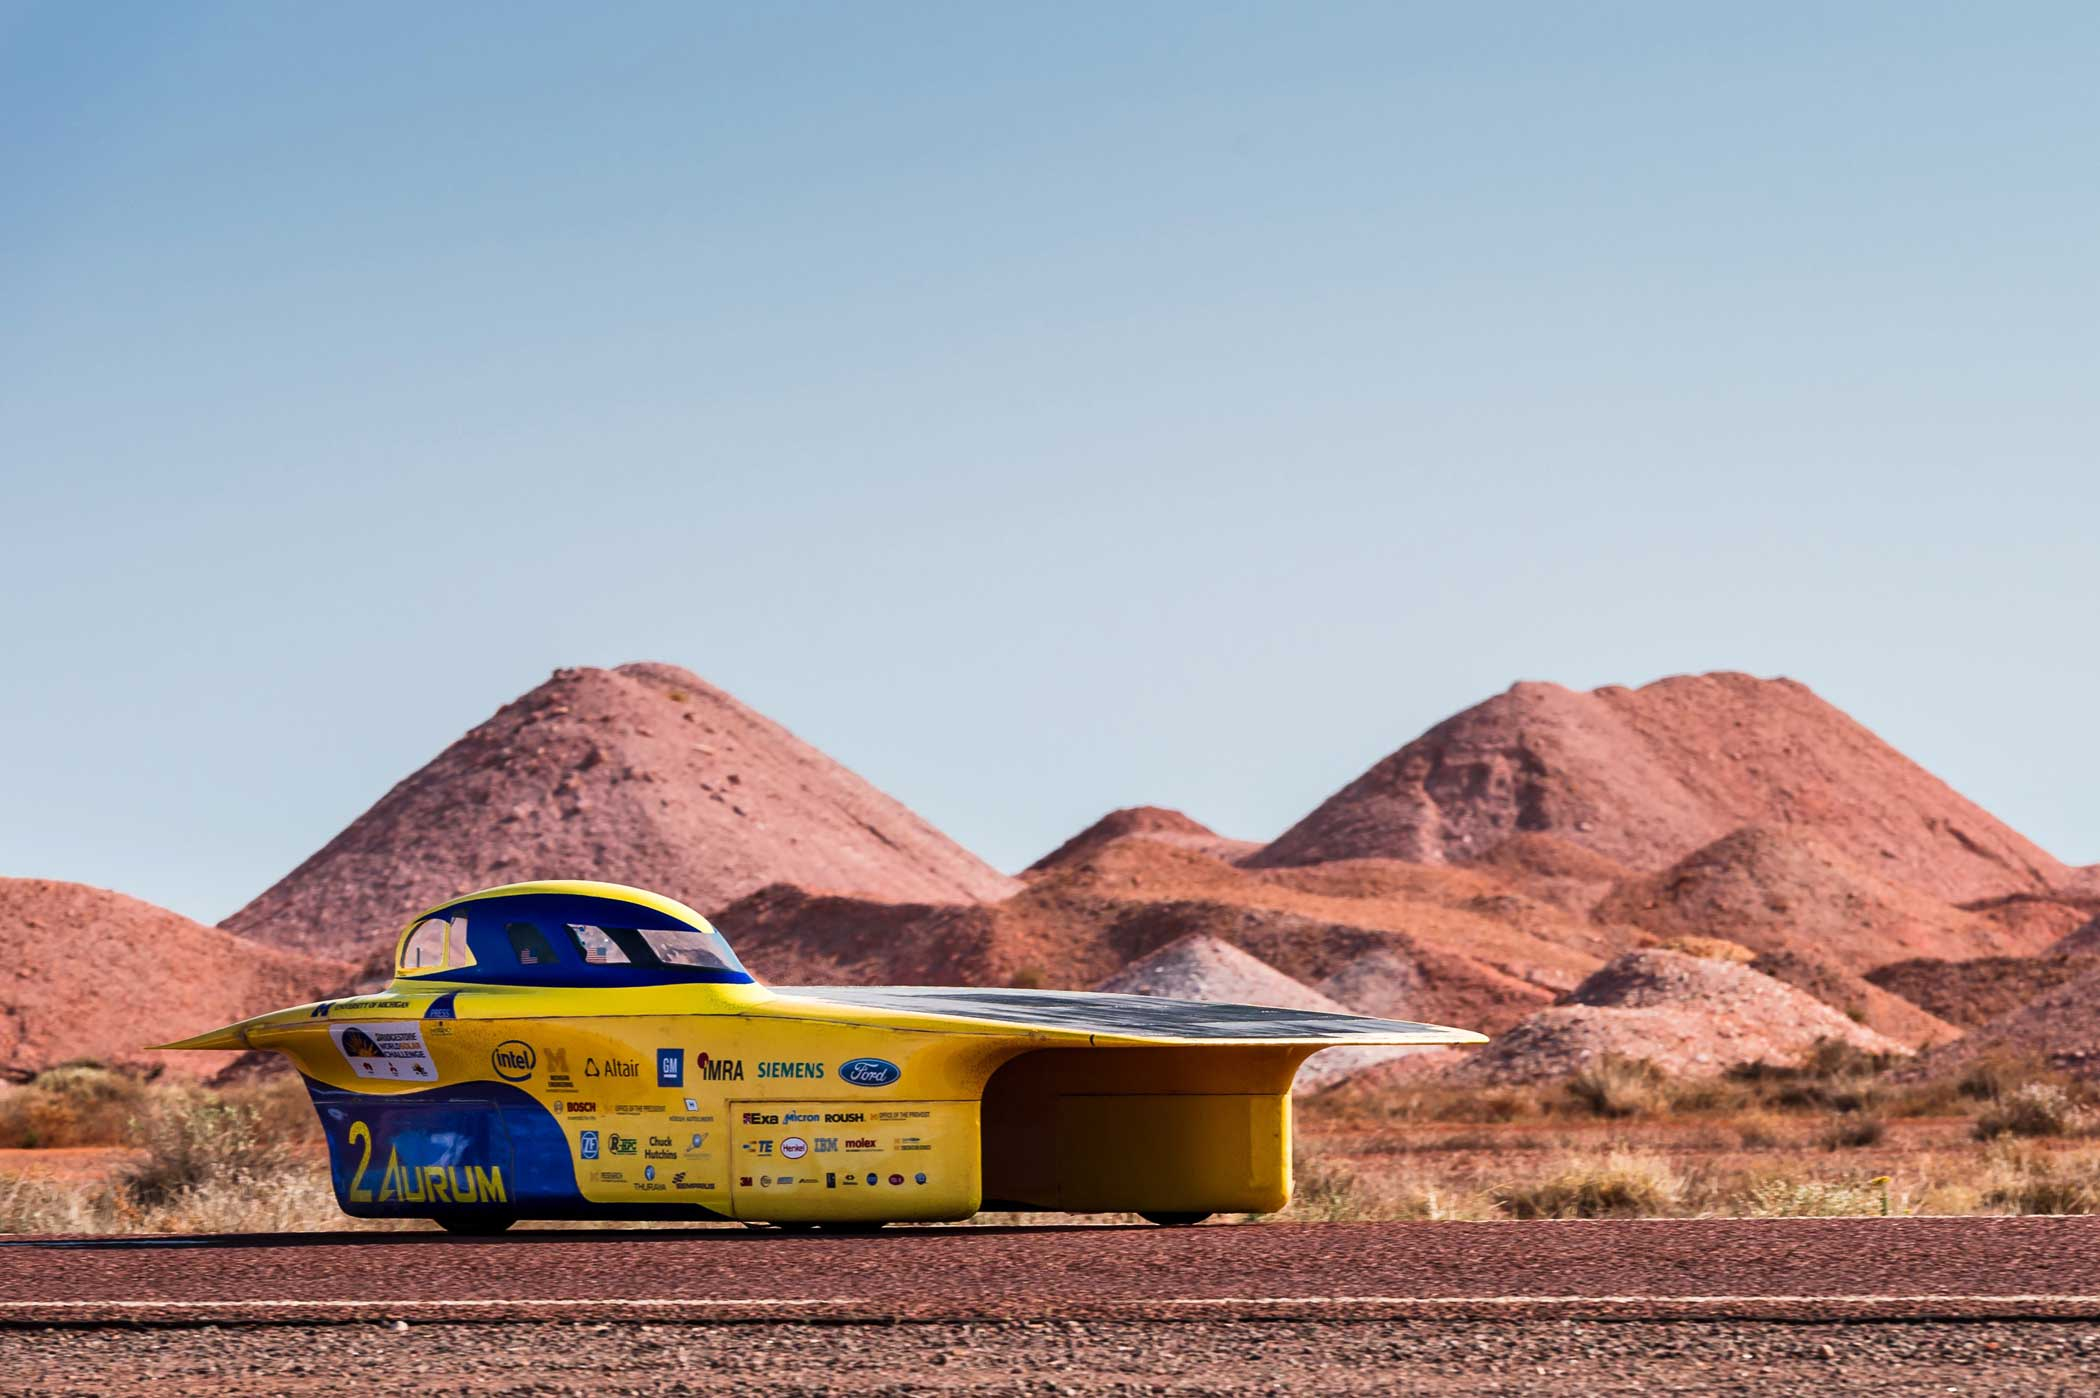 The University of Michigan Solar Car Team car competes during the fourth day of the 2015 World Solar Challenge in Coober Pedy, Australia, on Oct. 21, 2015.